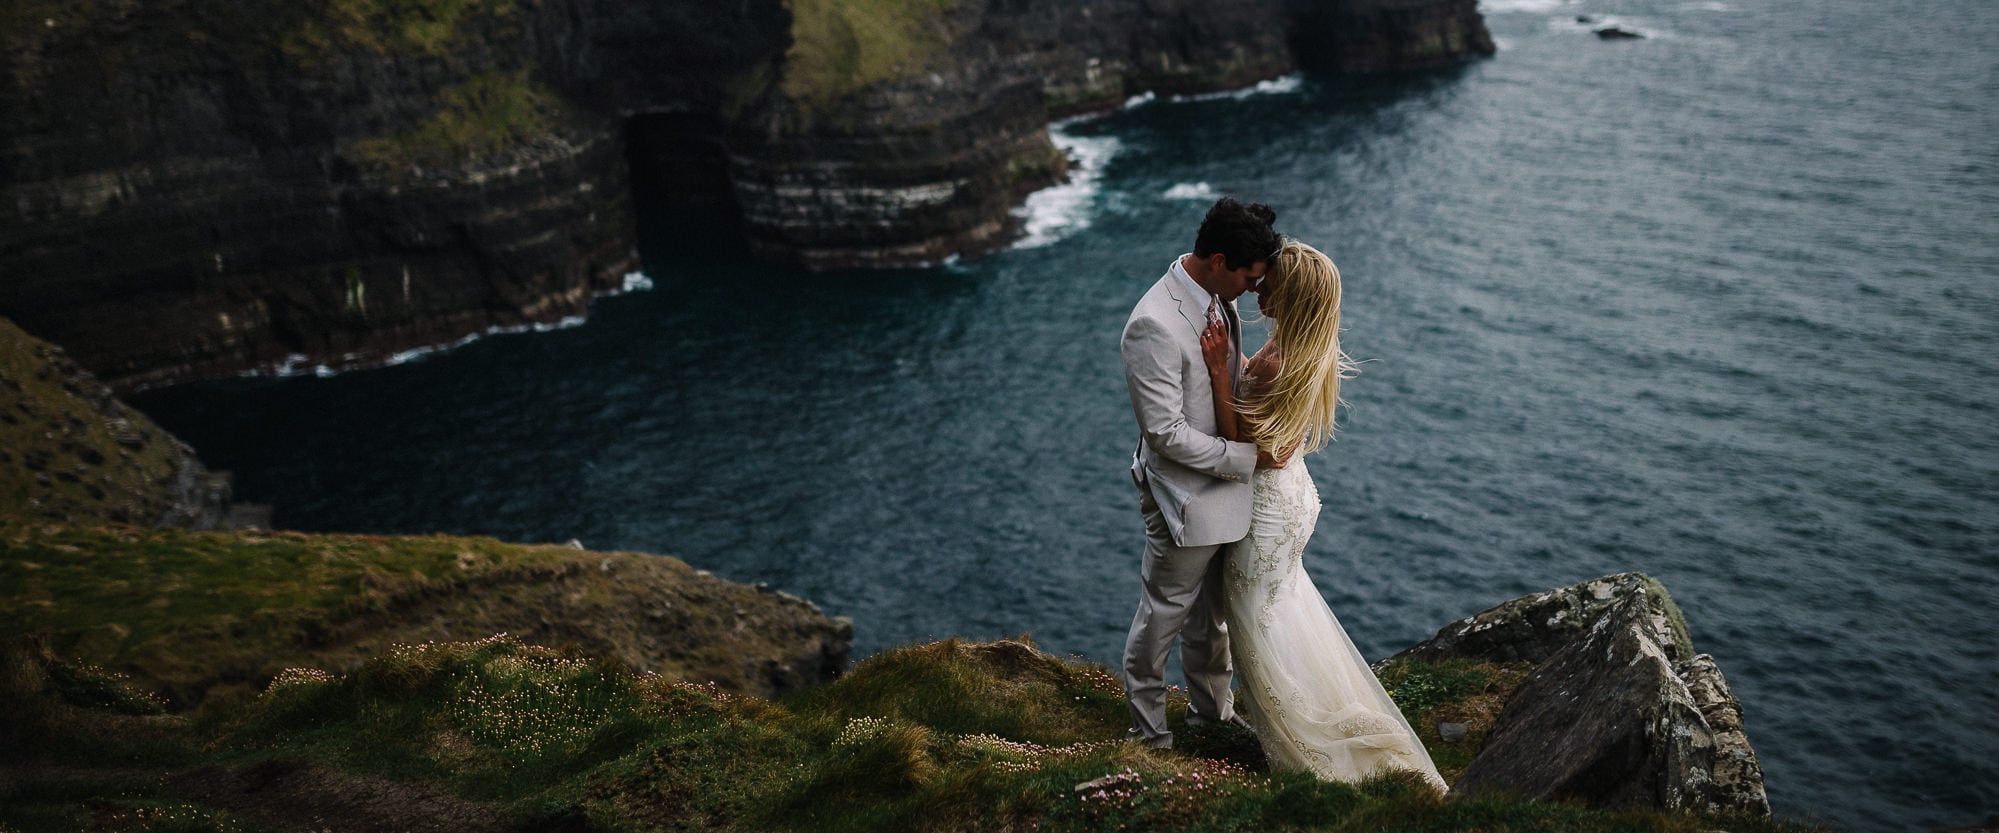 Jacob & Brittany // Cliffs of Moher Elopement